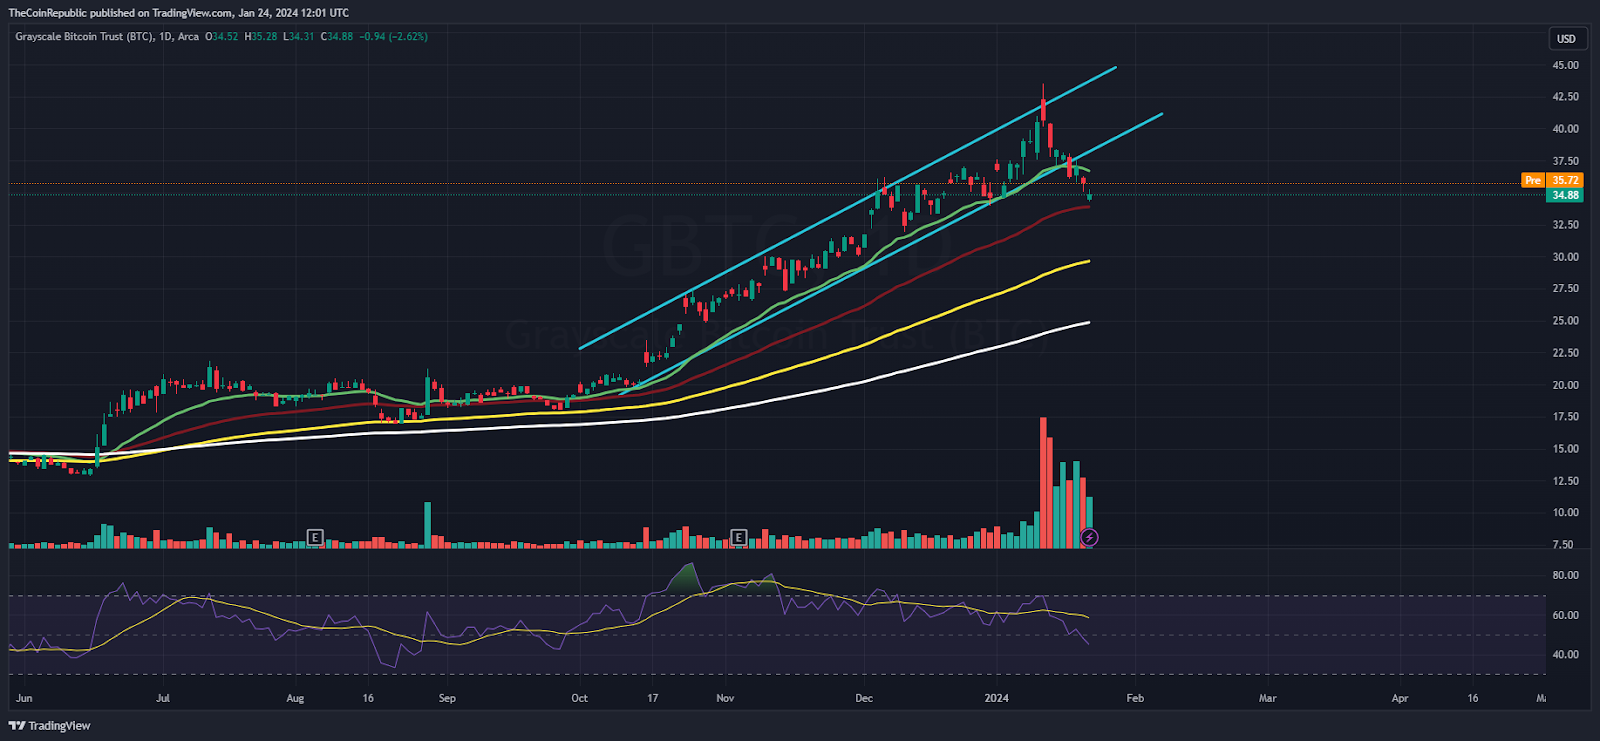 GBTC Breaches Channel Lows; Will This Stock Face Correction?